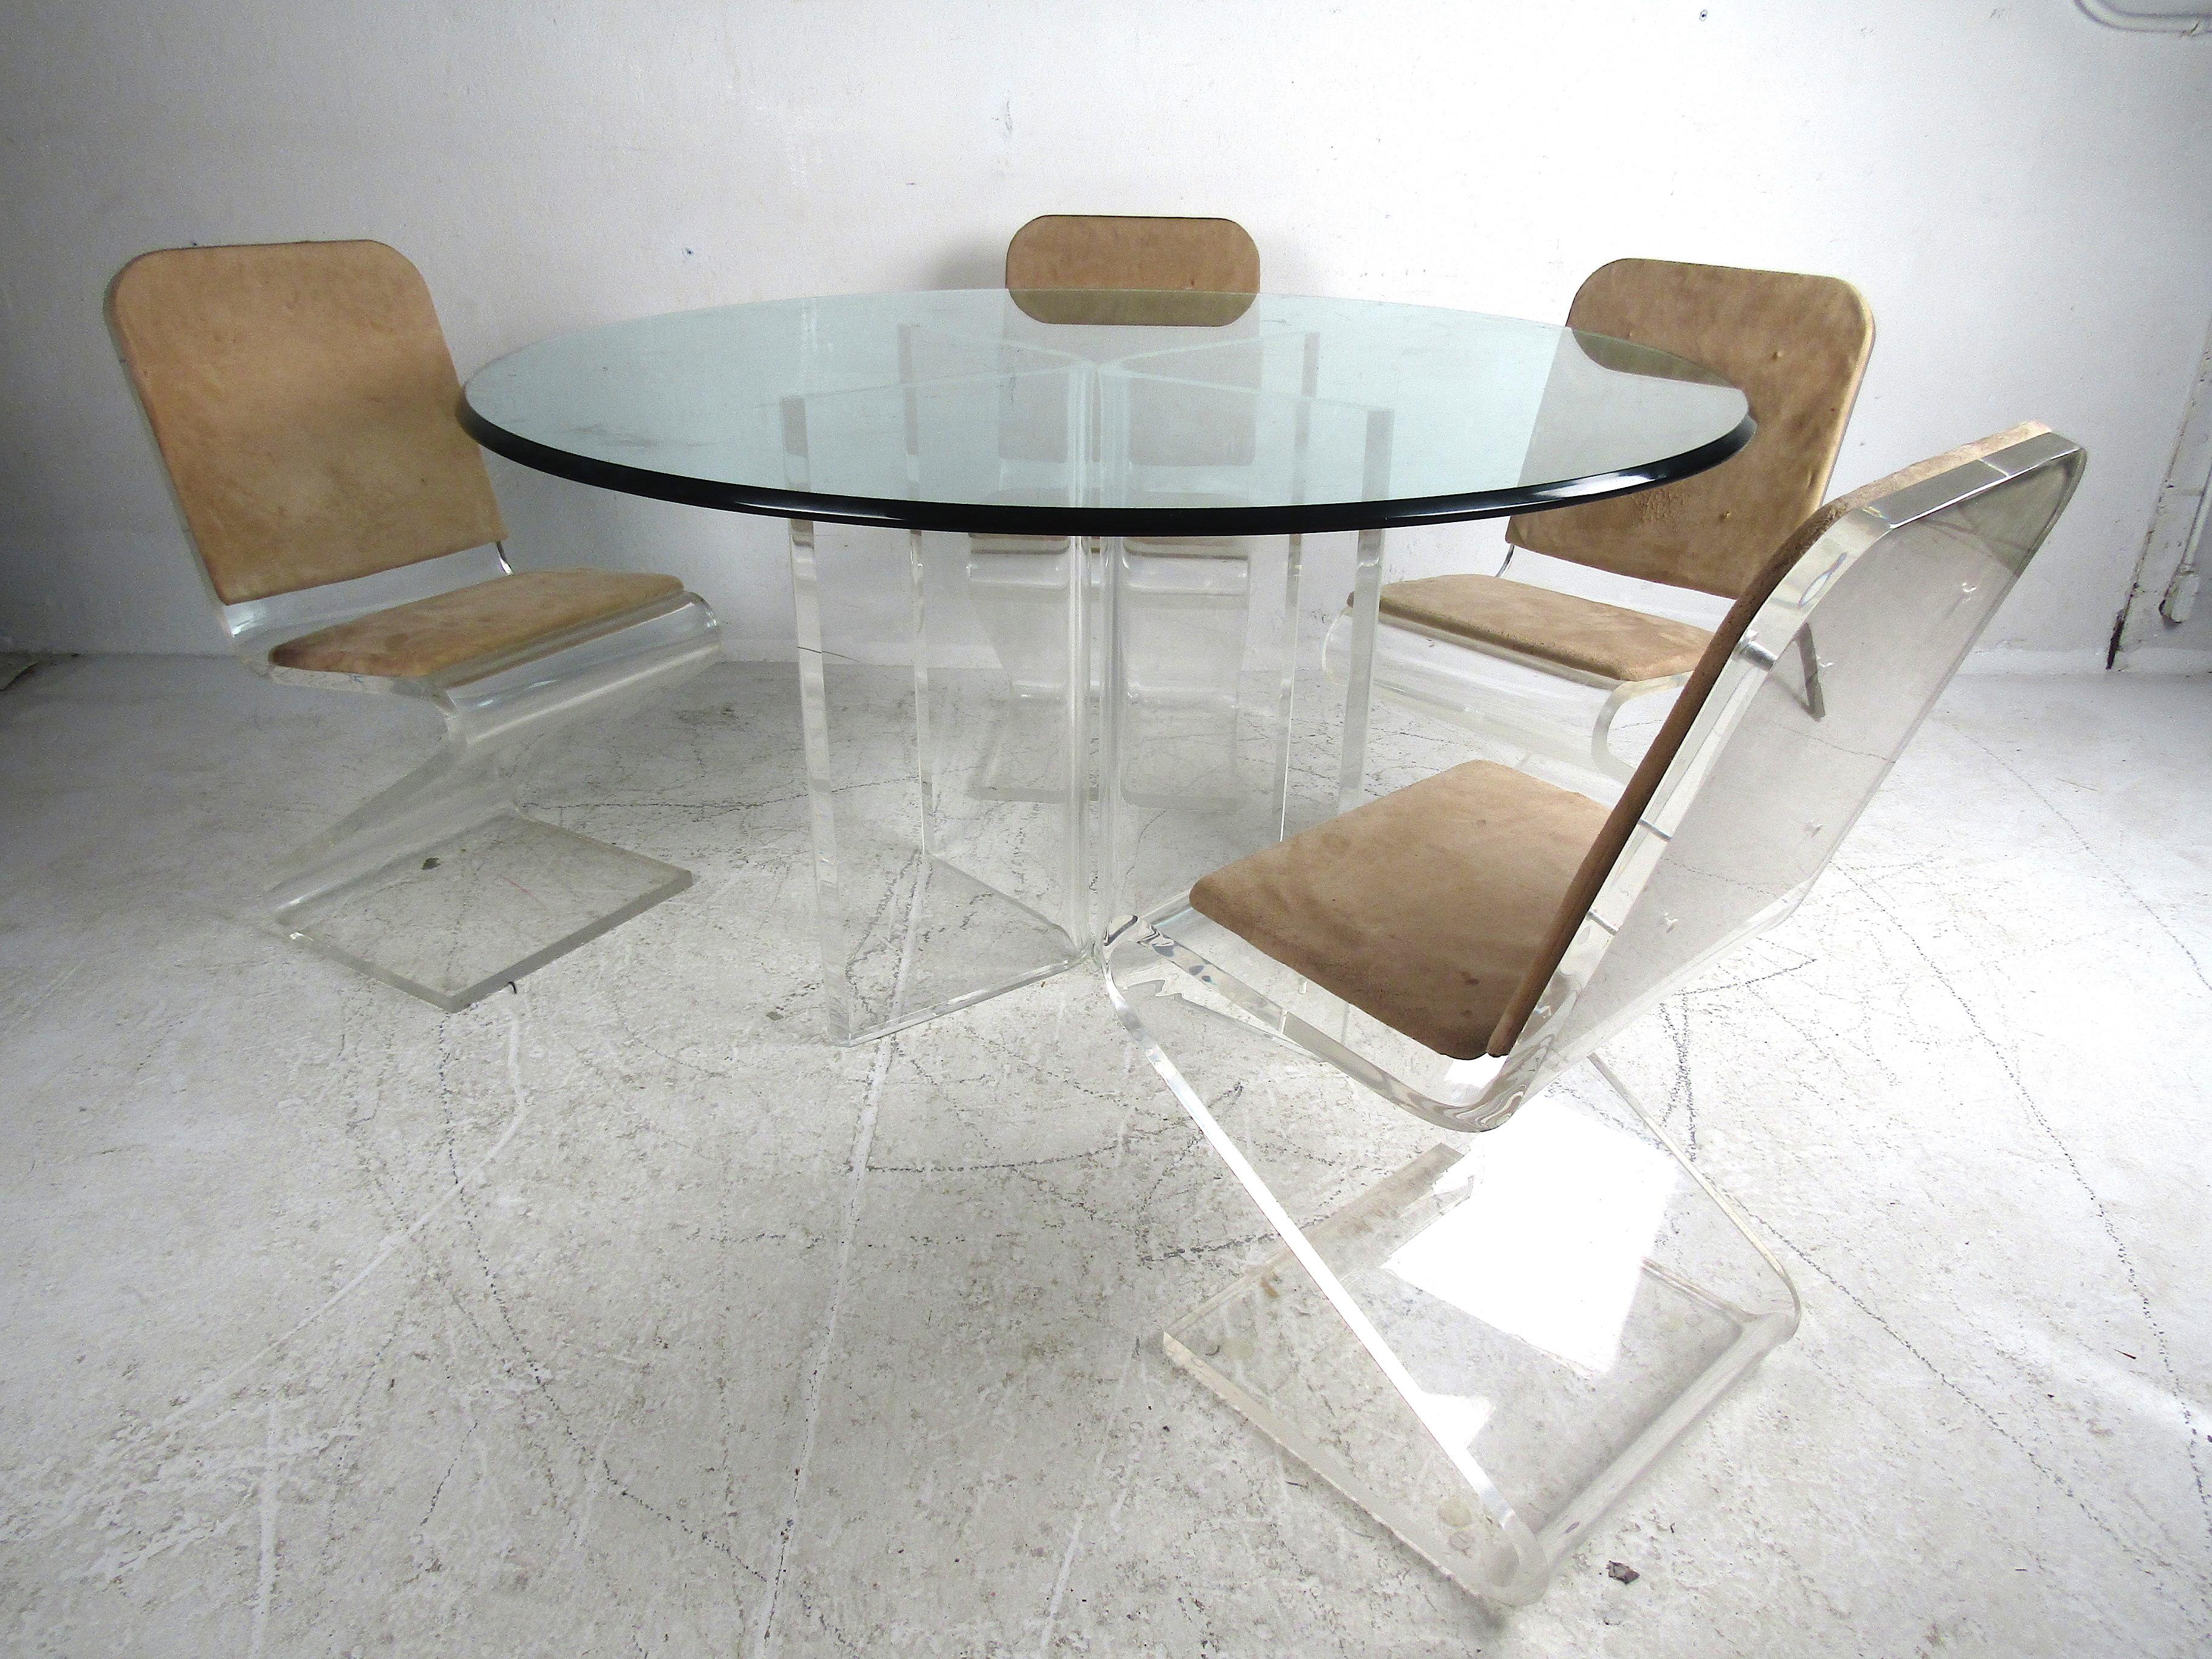 Stylish Mid-Century Modern Lucite and glass dining set. Large circular glass tabletop with adjustable Lucite bases. Set of 4 dining chairs with Lucite 